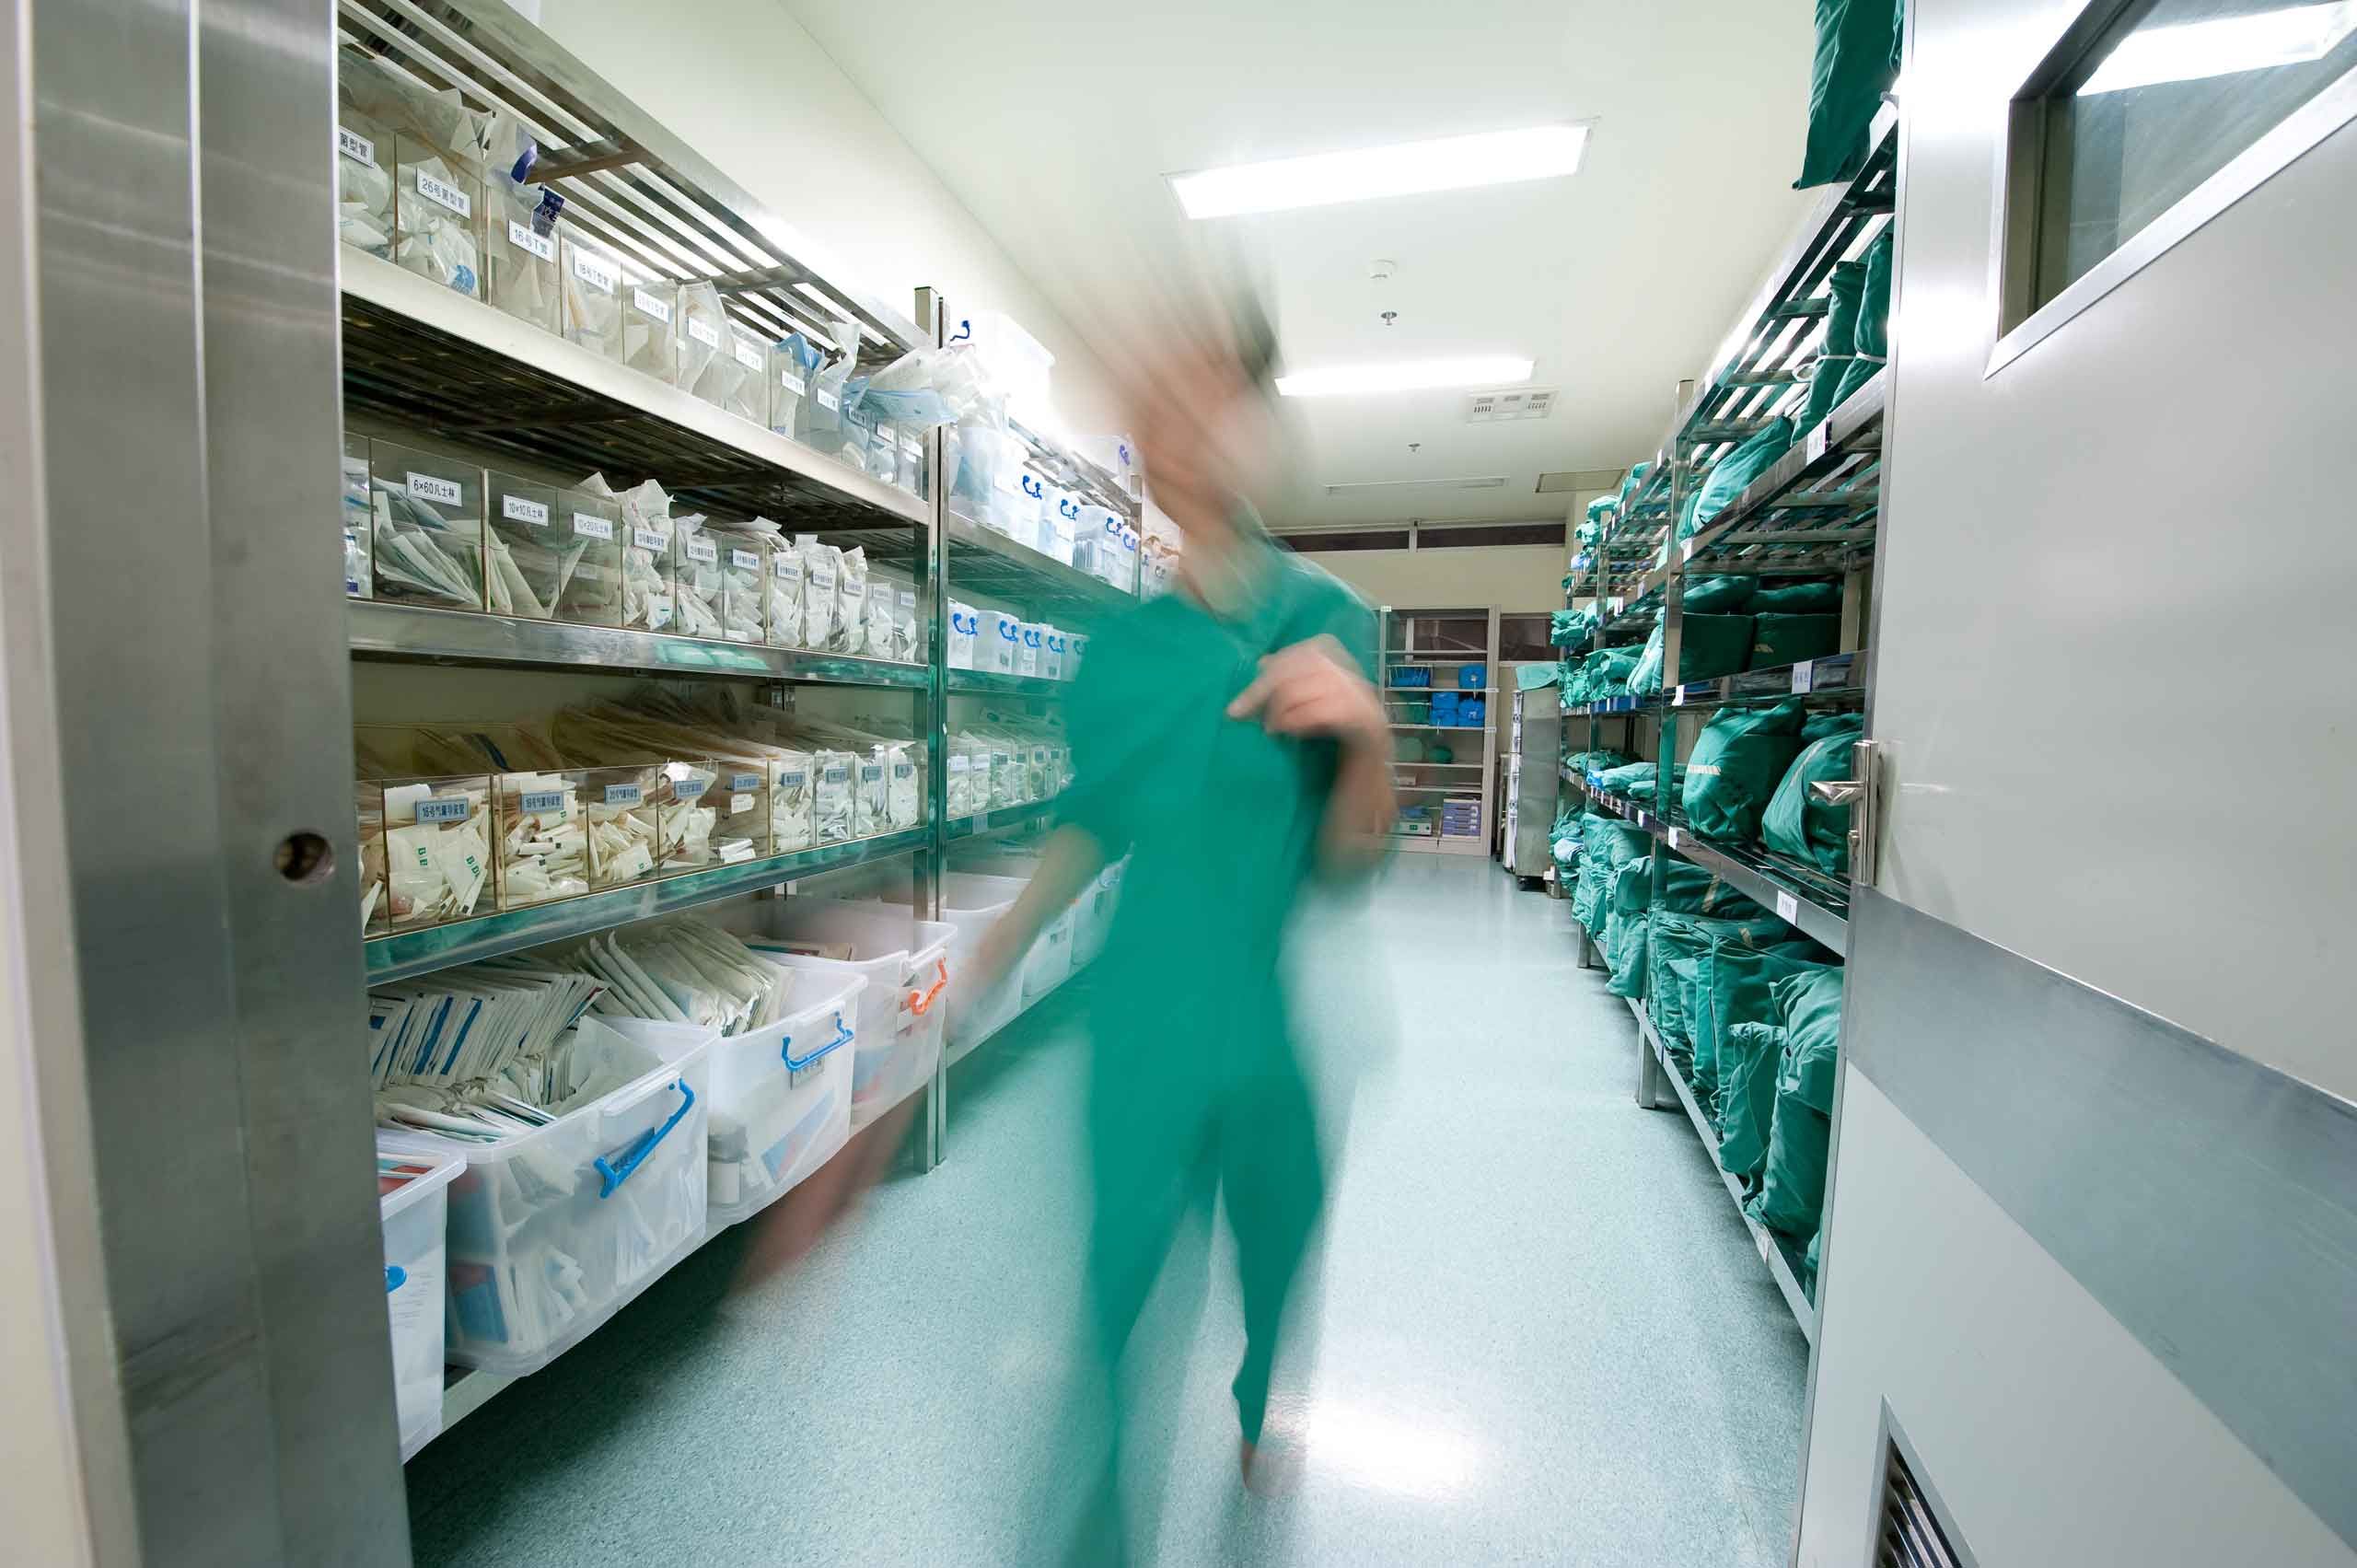 A nurse in hospital warehouse, a warehouse full of medical devices image.